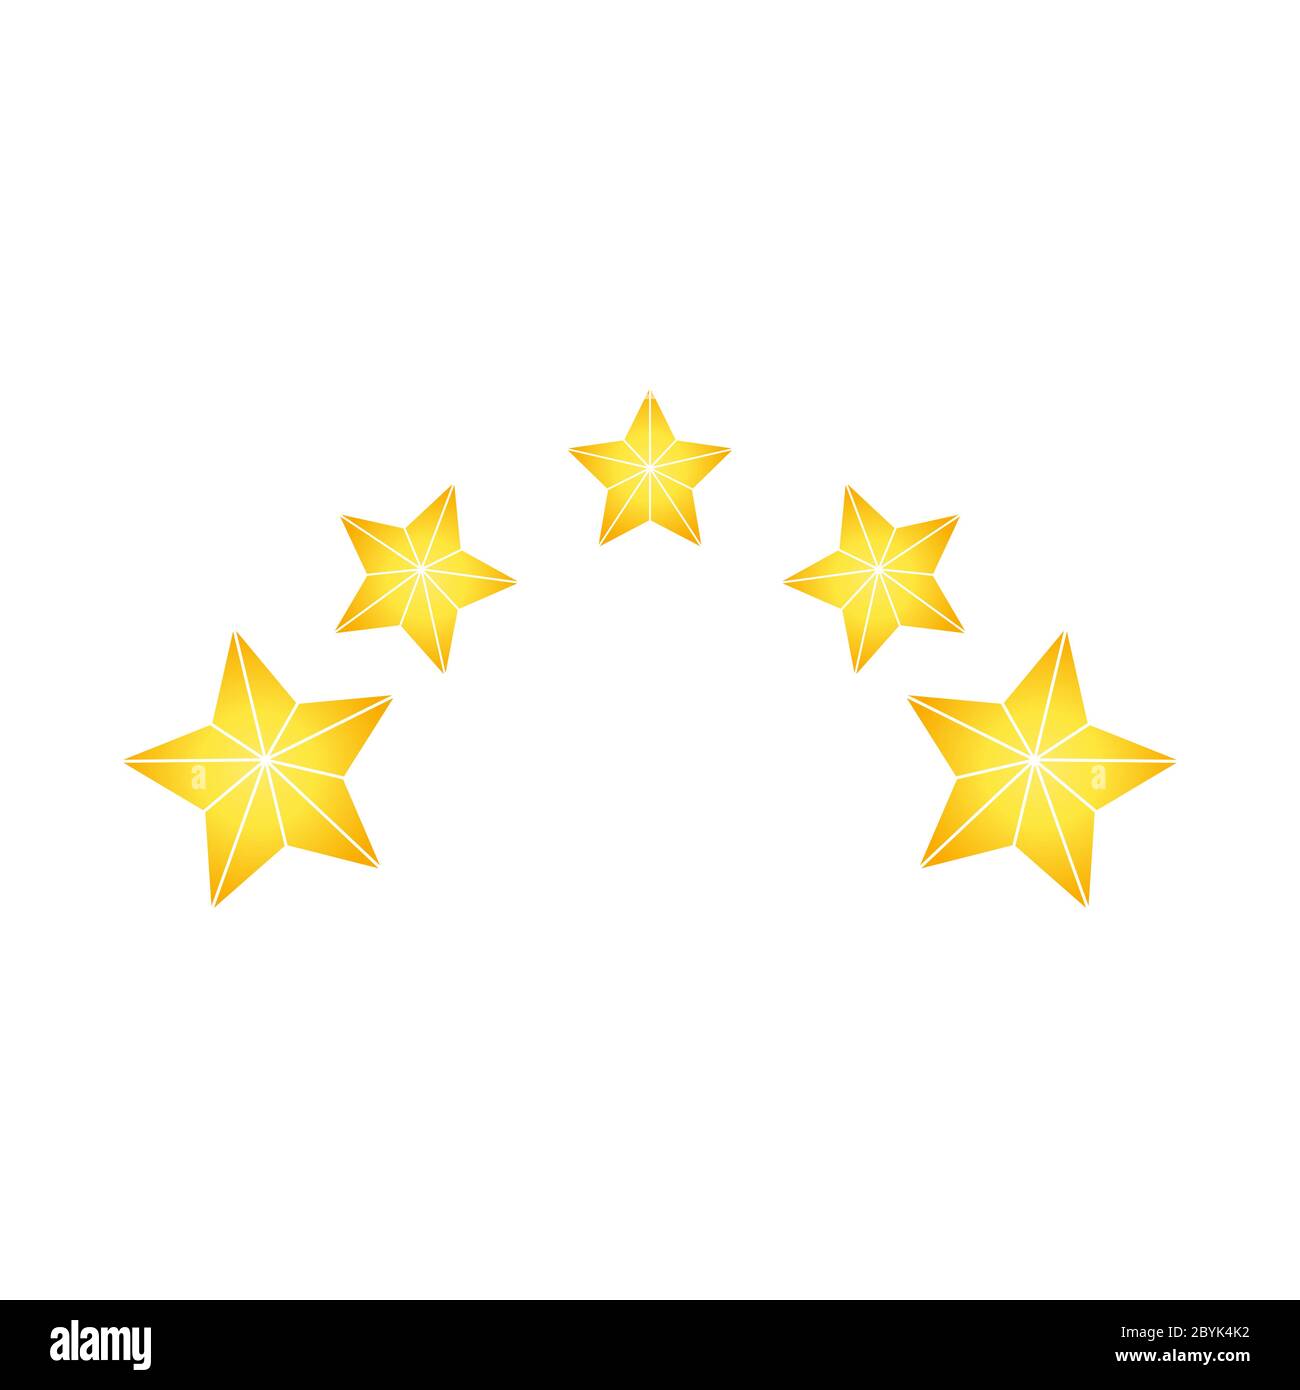 Product ratings, five stars or golden star, quality rating, feedback, premium icon flat logo in yellow on isolated white background. EPS 10 vector Stock Vector